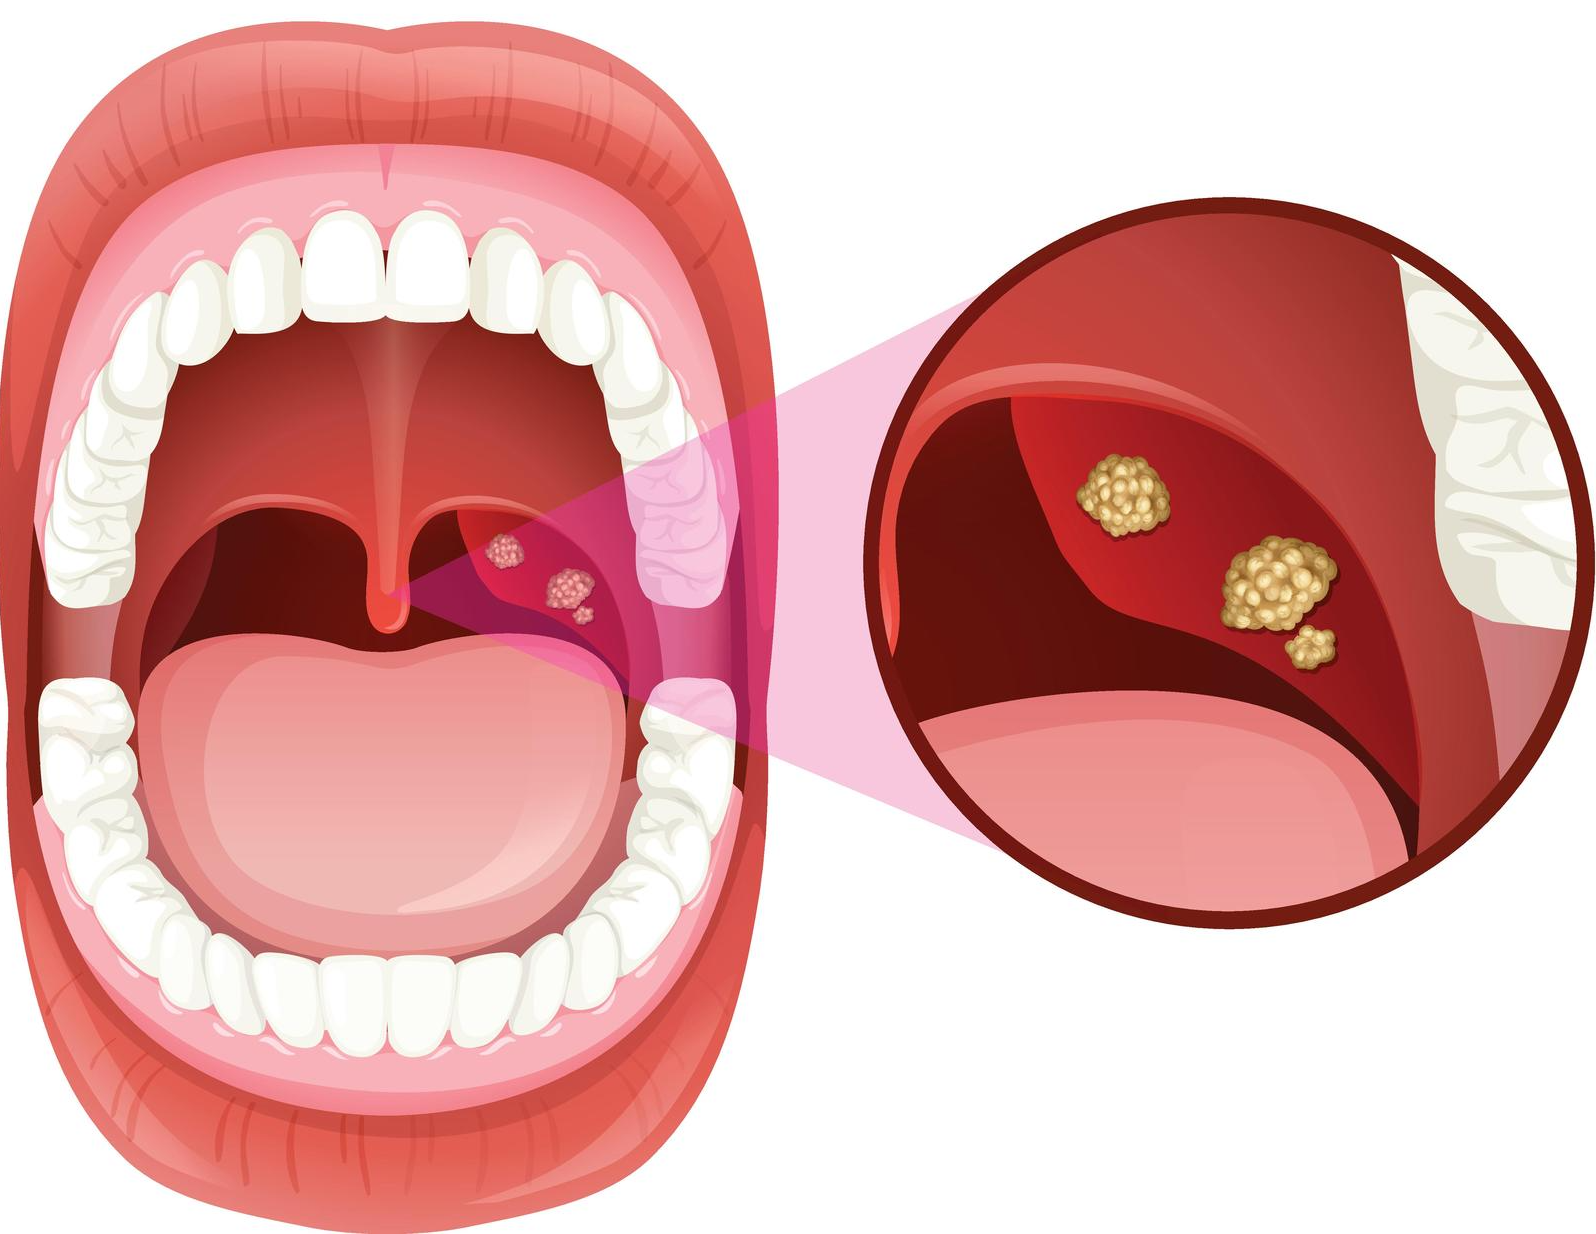 a cartoon illustration of a person 's mouth with a sore throat .